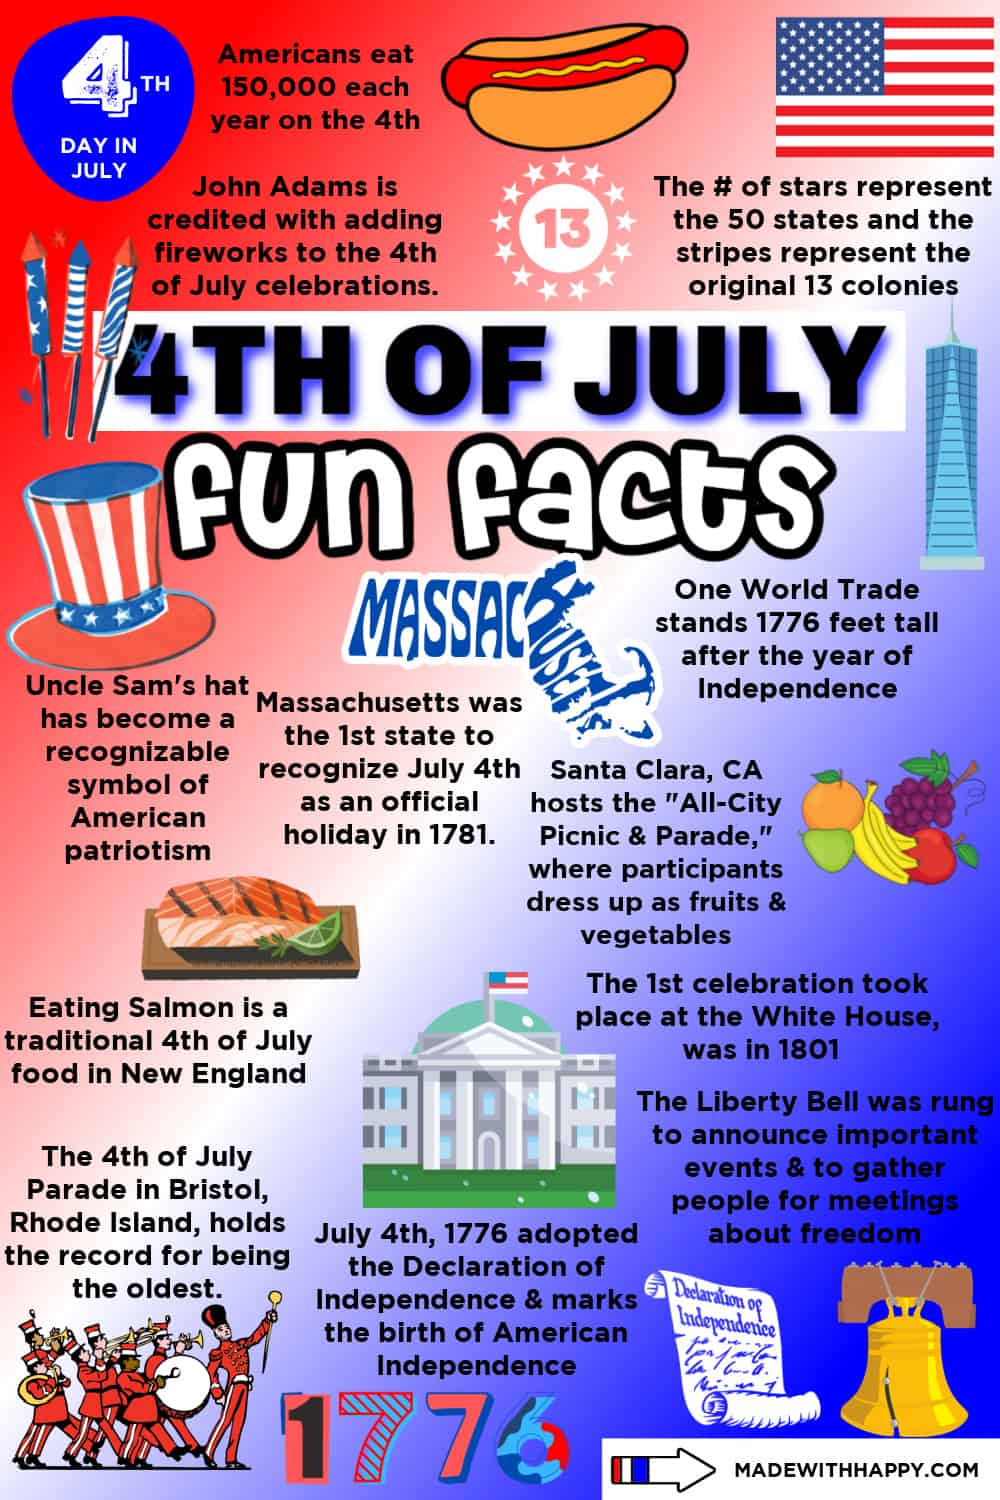 Fun Facts About 4th of July